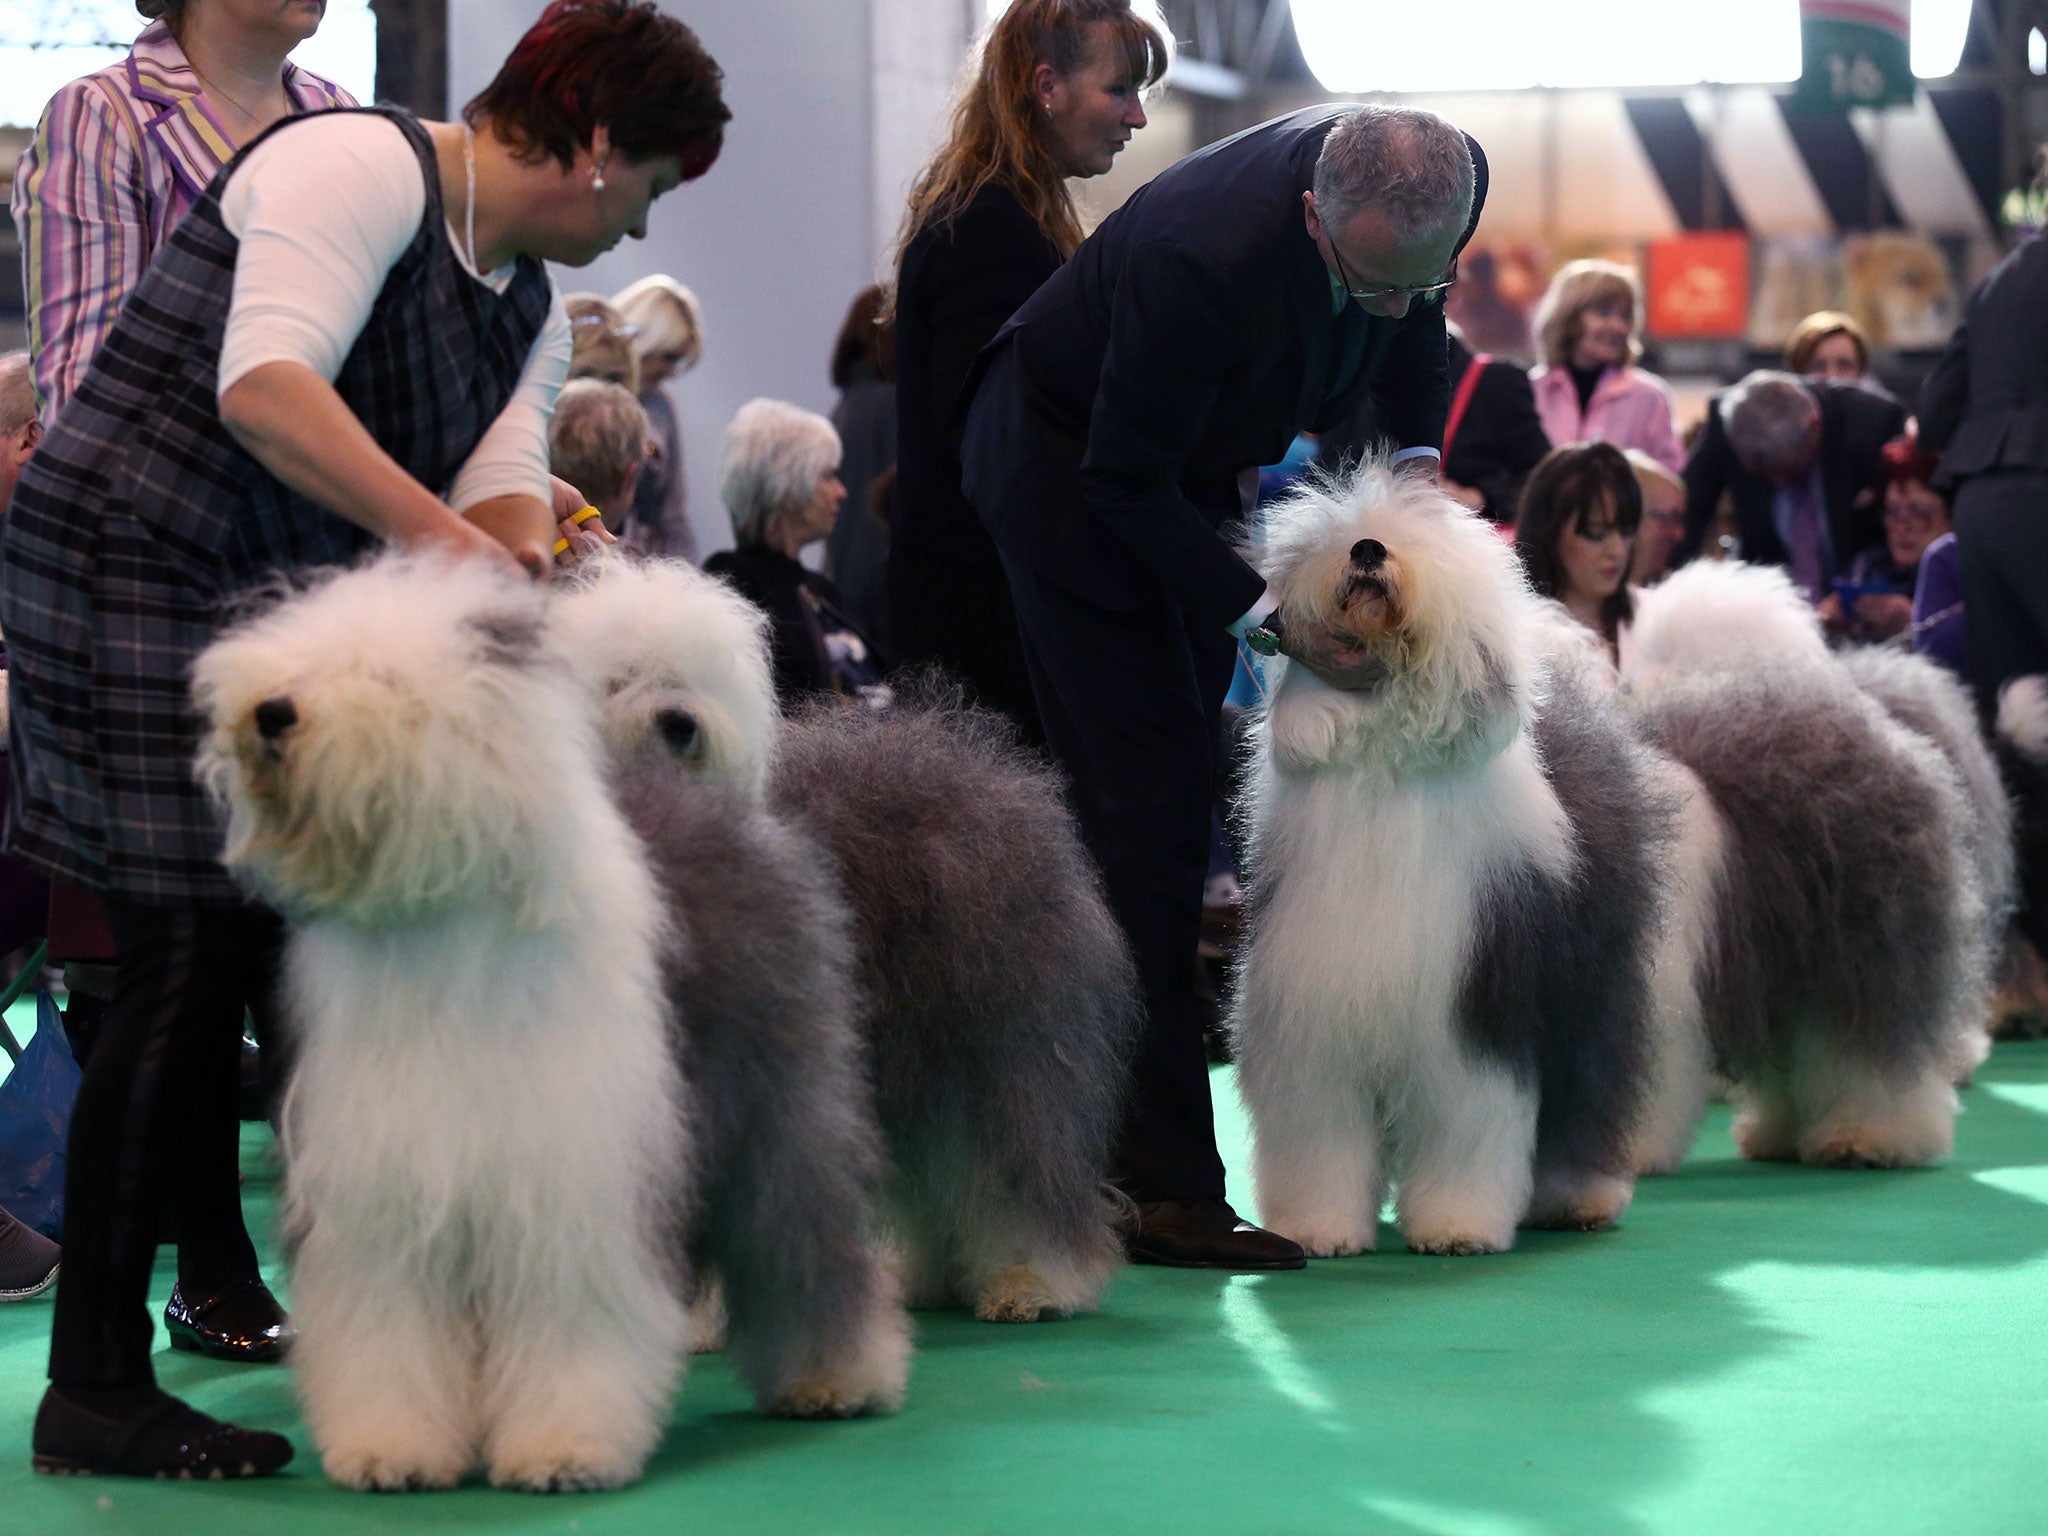 Polish Lowland Sheepdogs are paraded in the show ring during Crufts